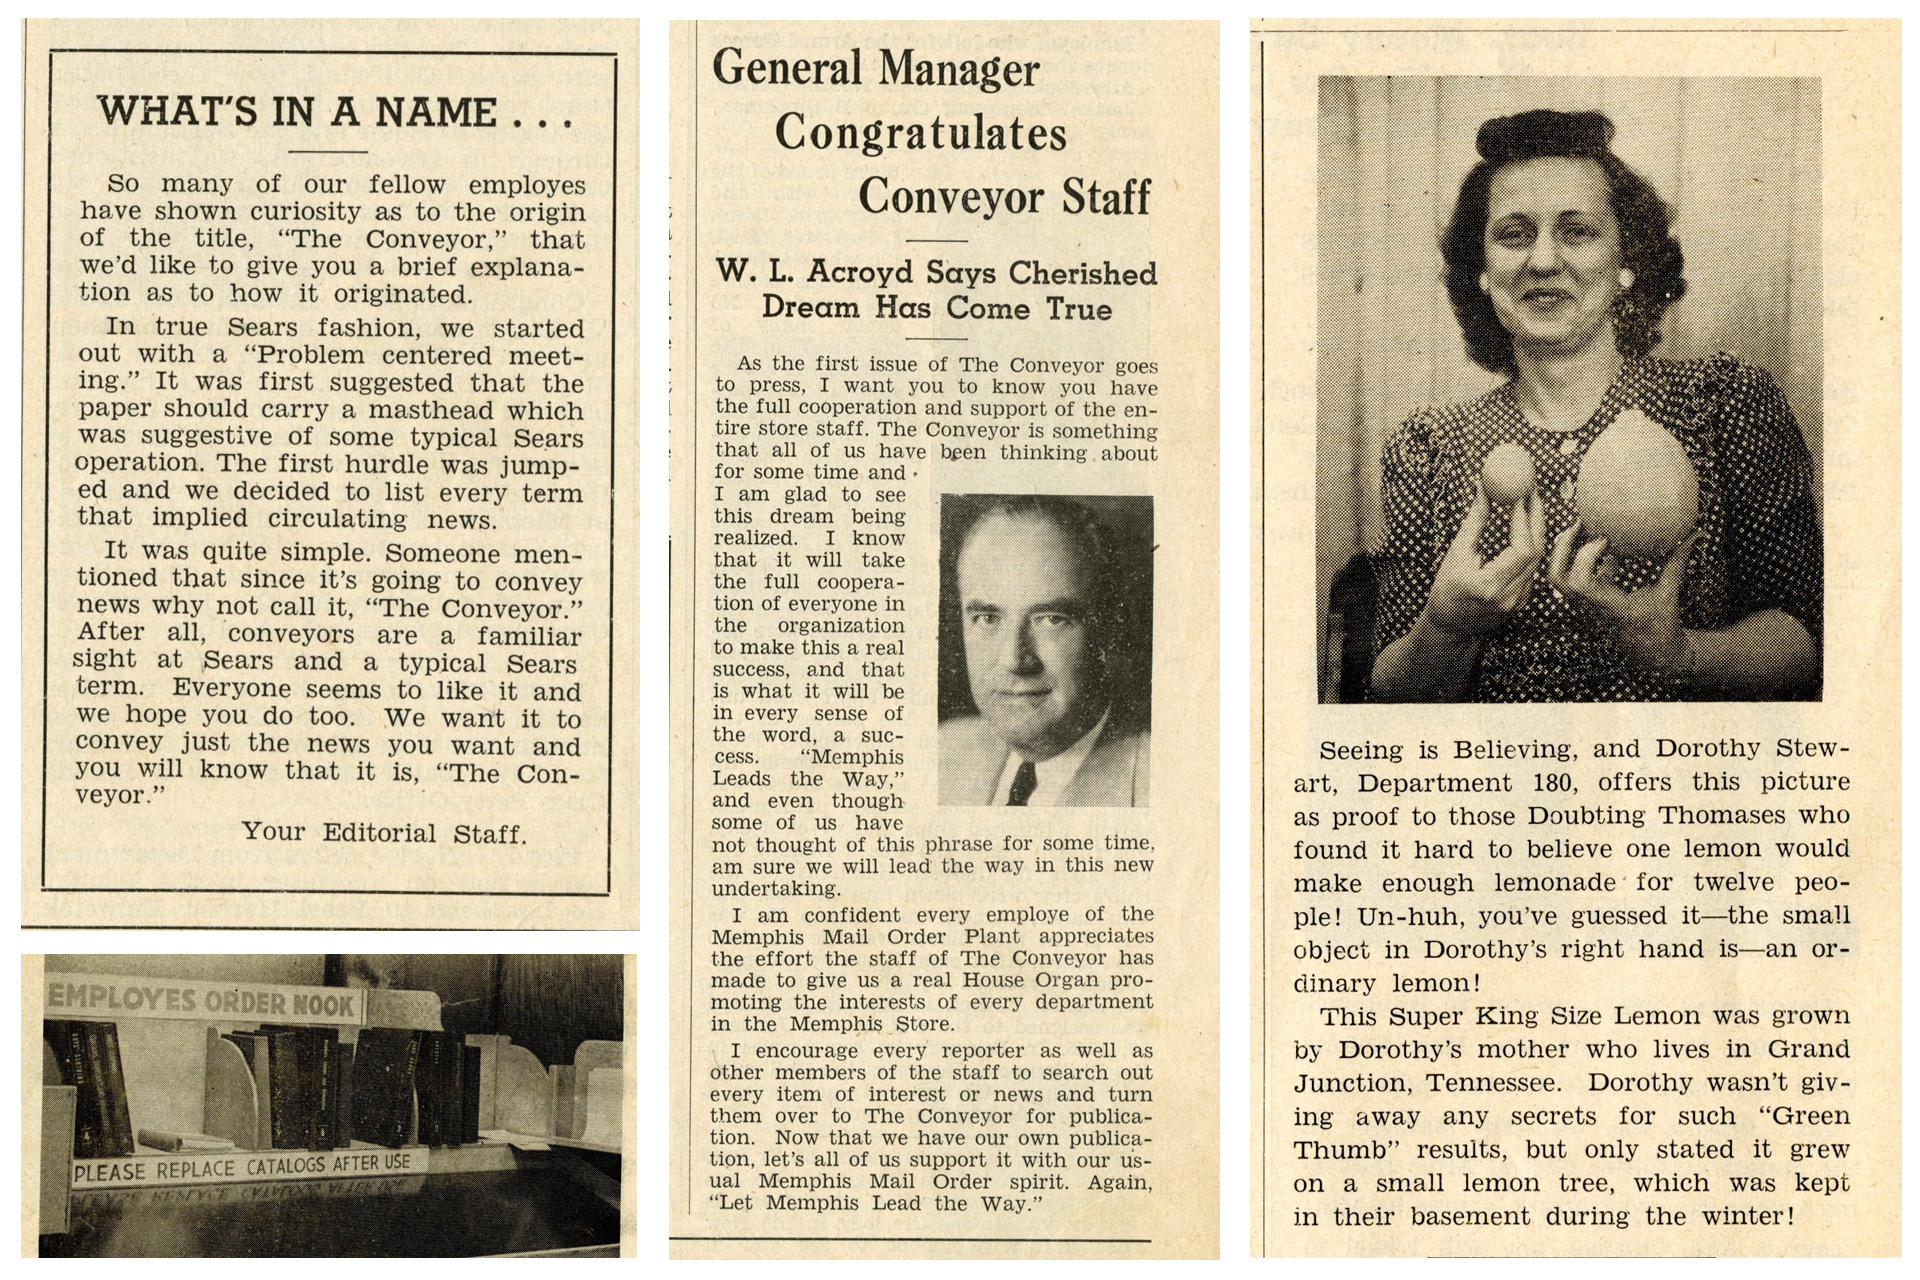 Clippings from the First Issue of The Conveyor, June 19th, 1945